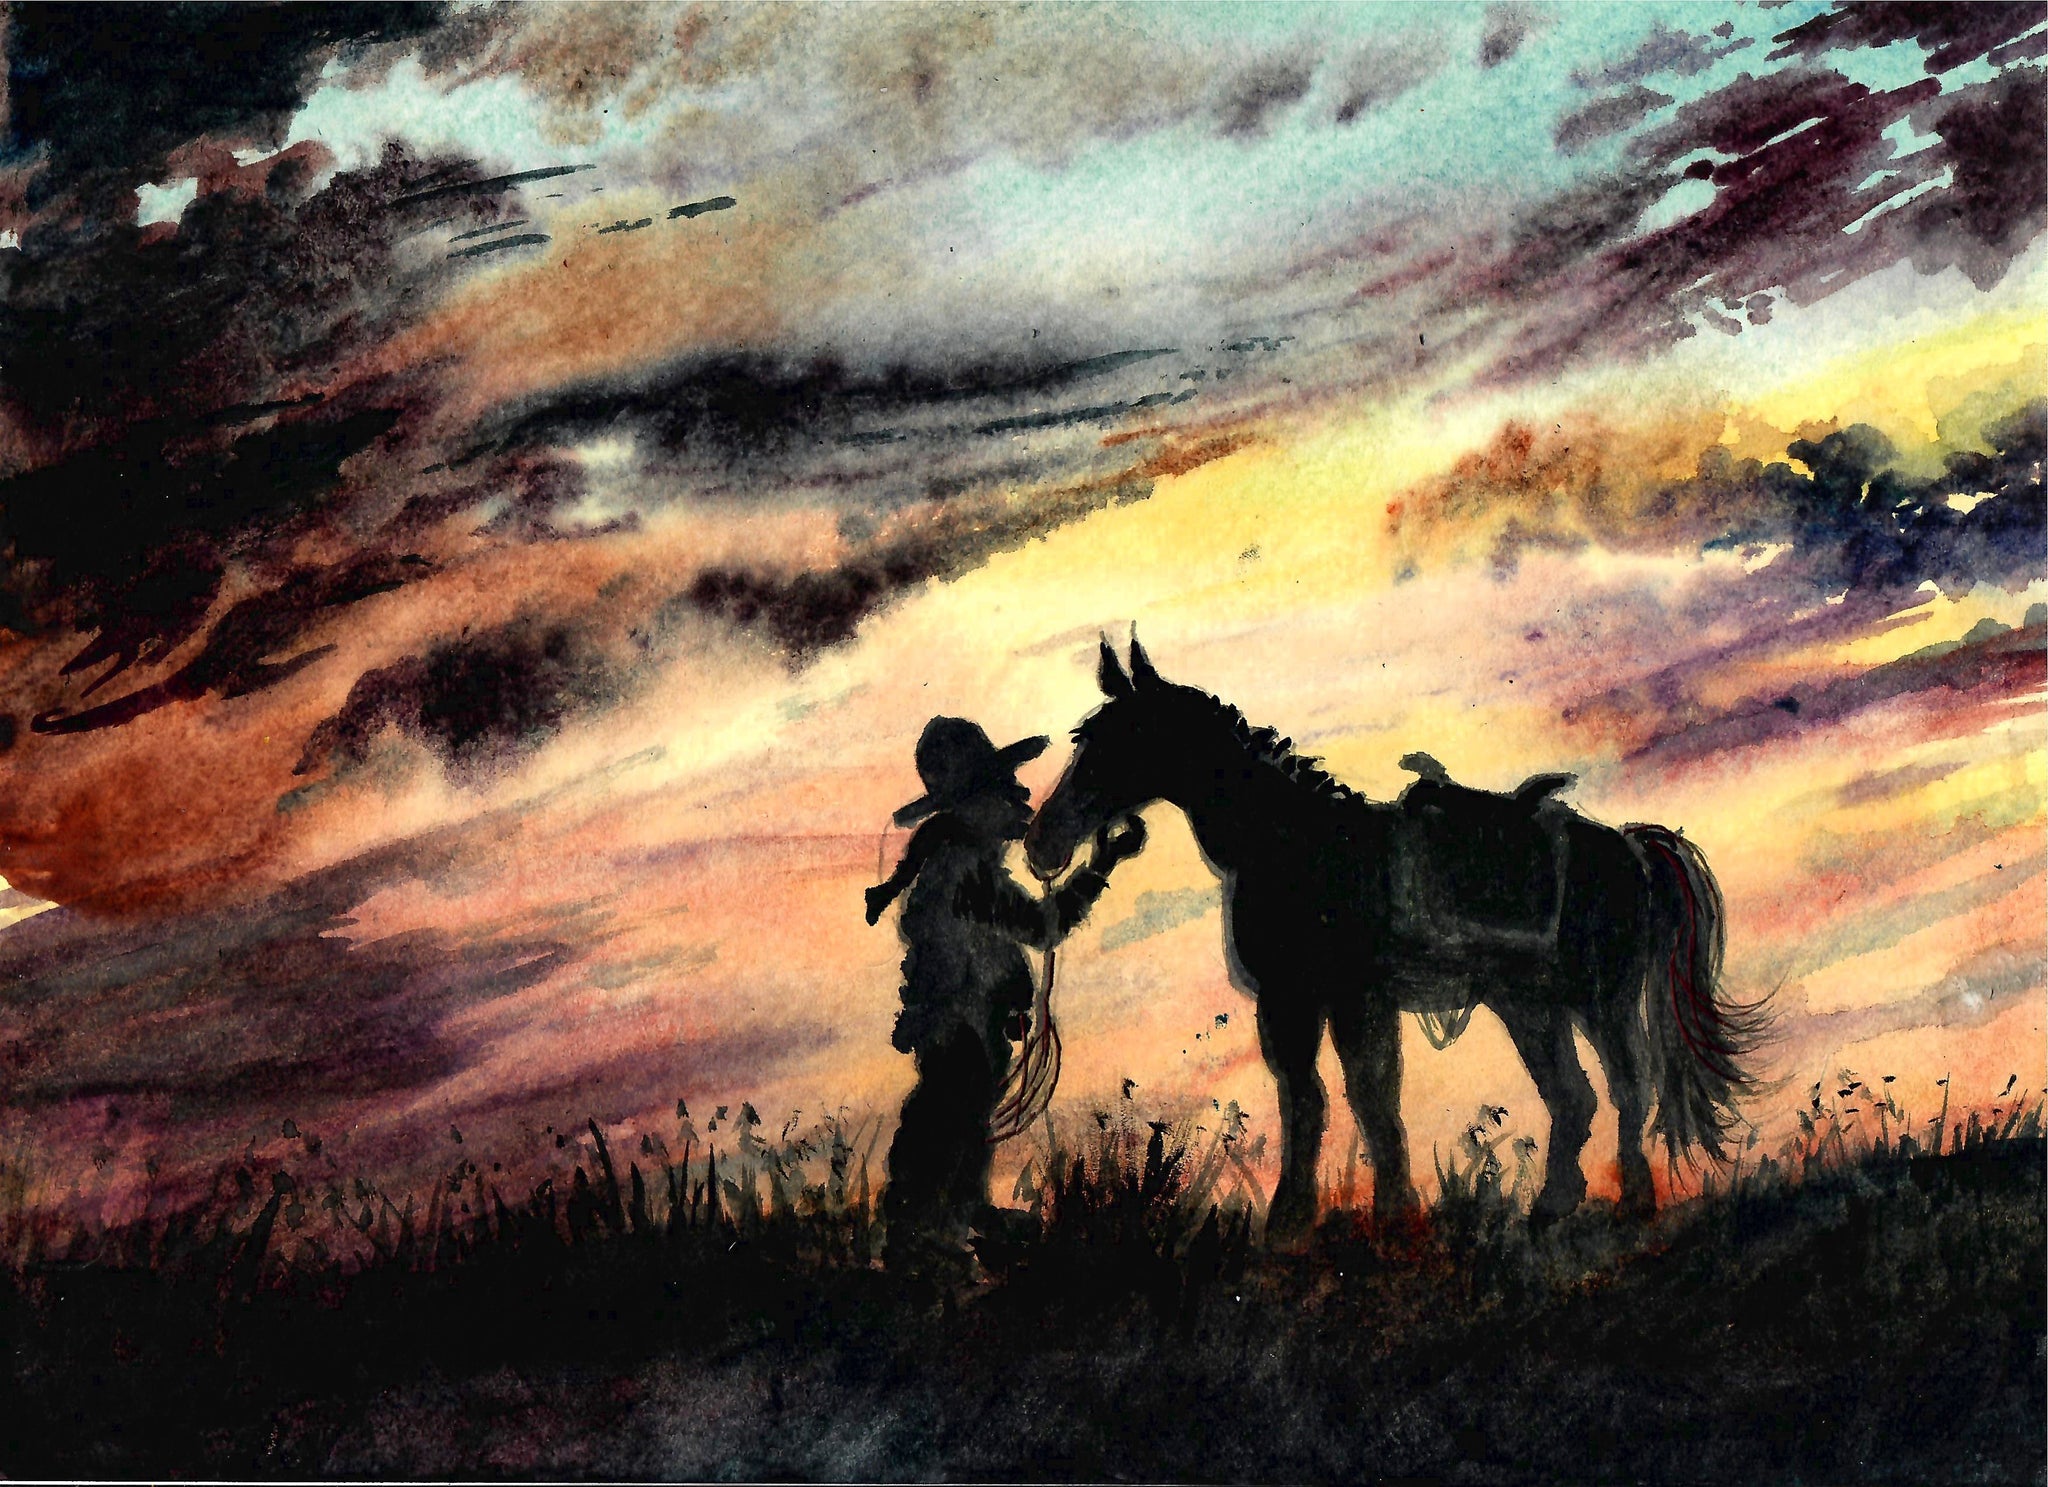 Western - Cowboy And Horse In A Beautiful Sunset, Sunset Art, Cowboy Art, Western Art